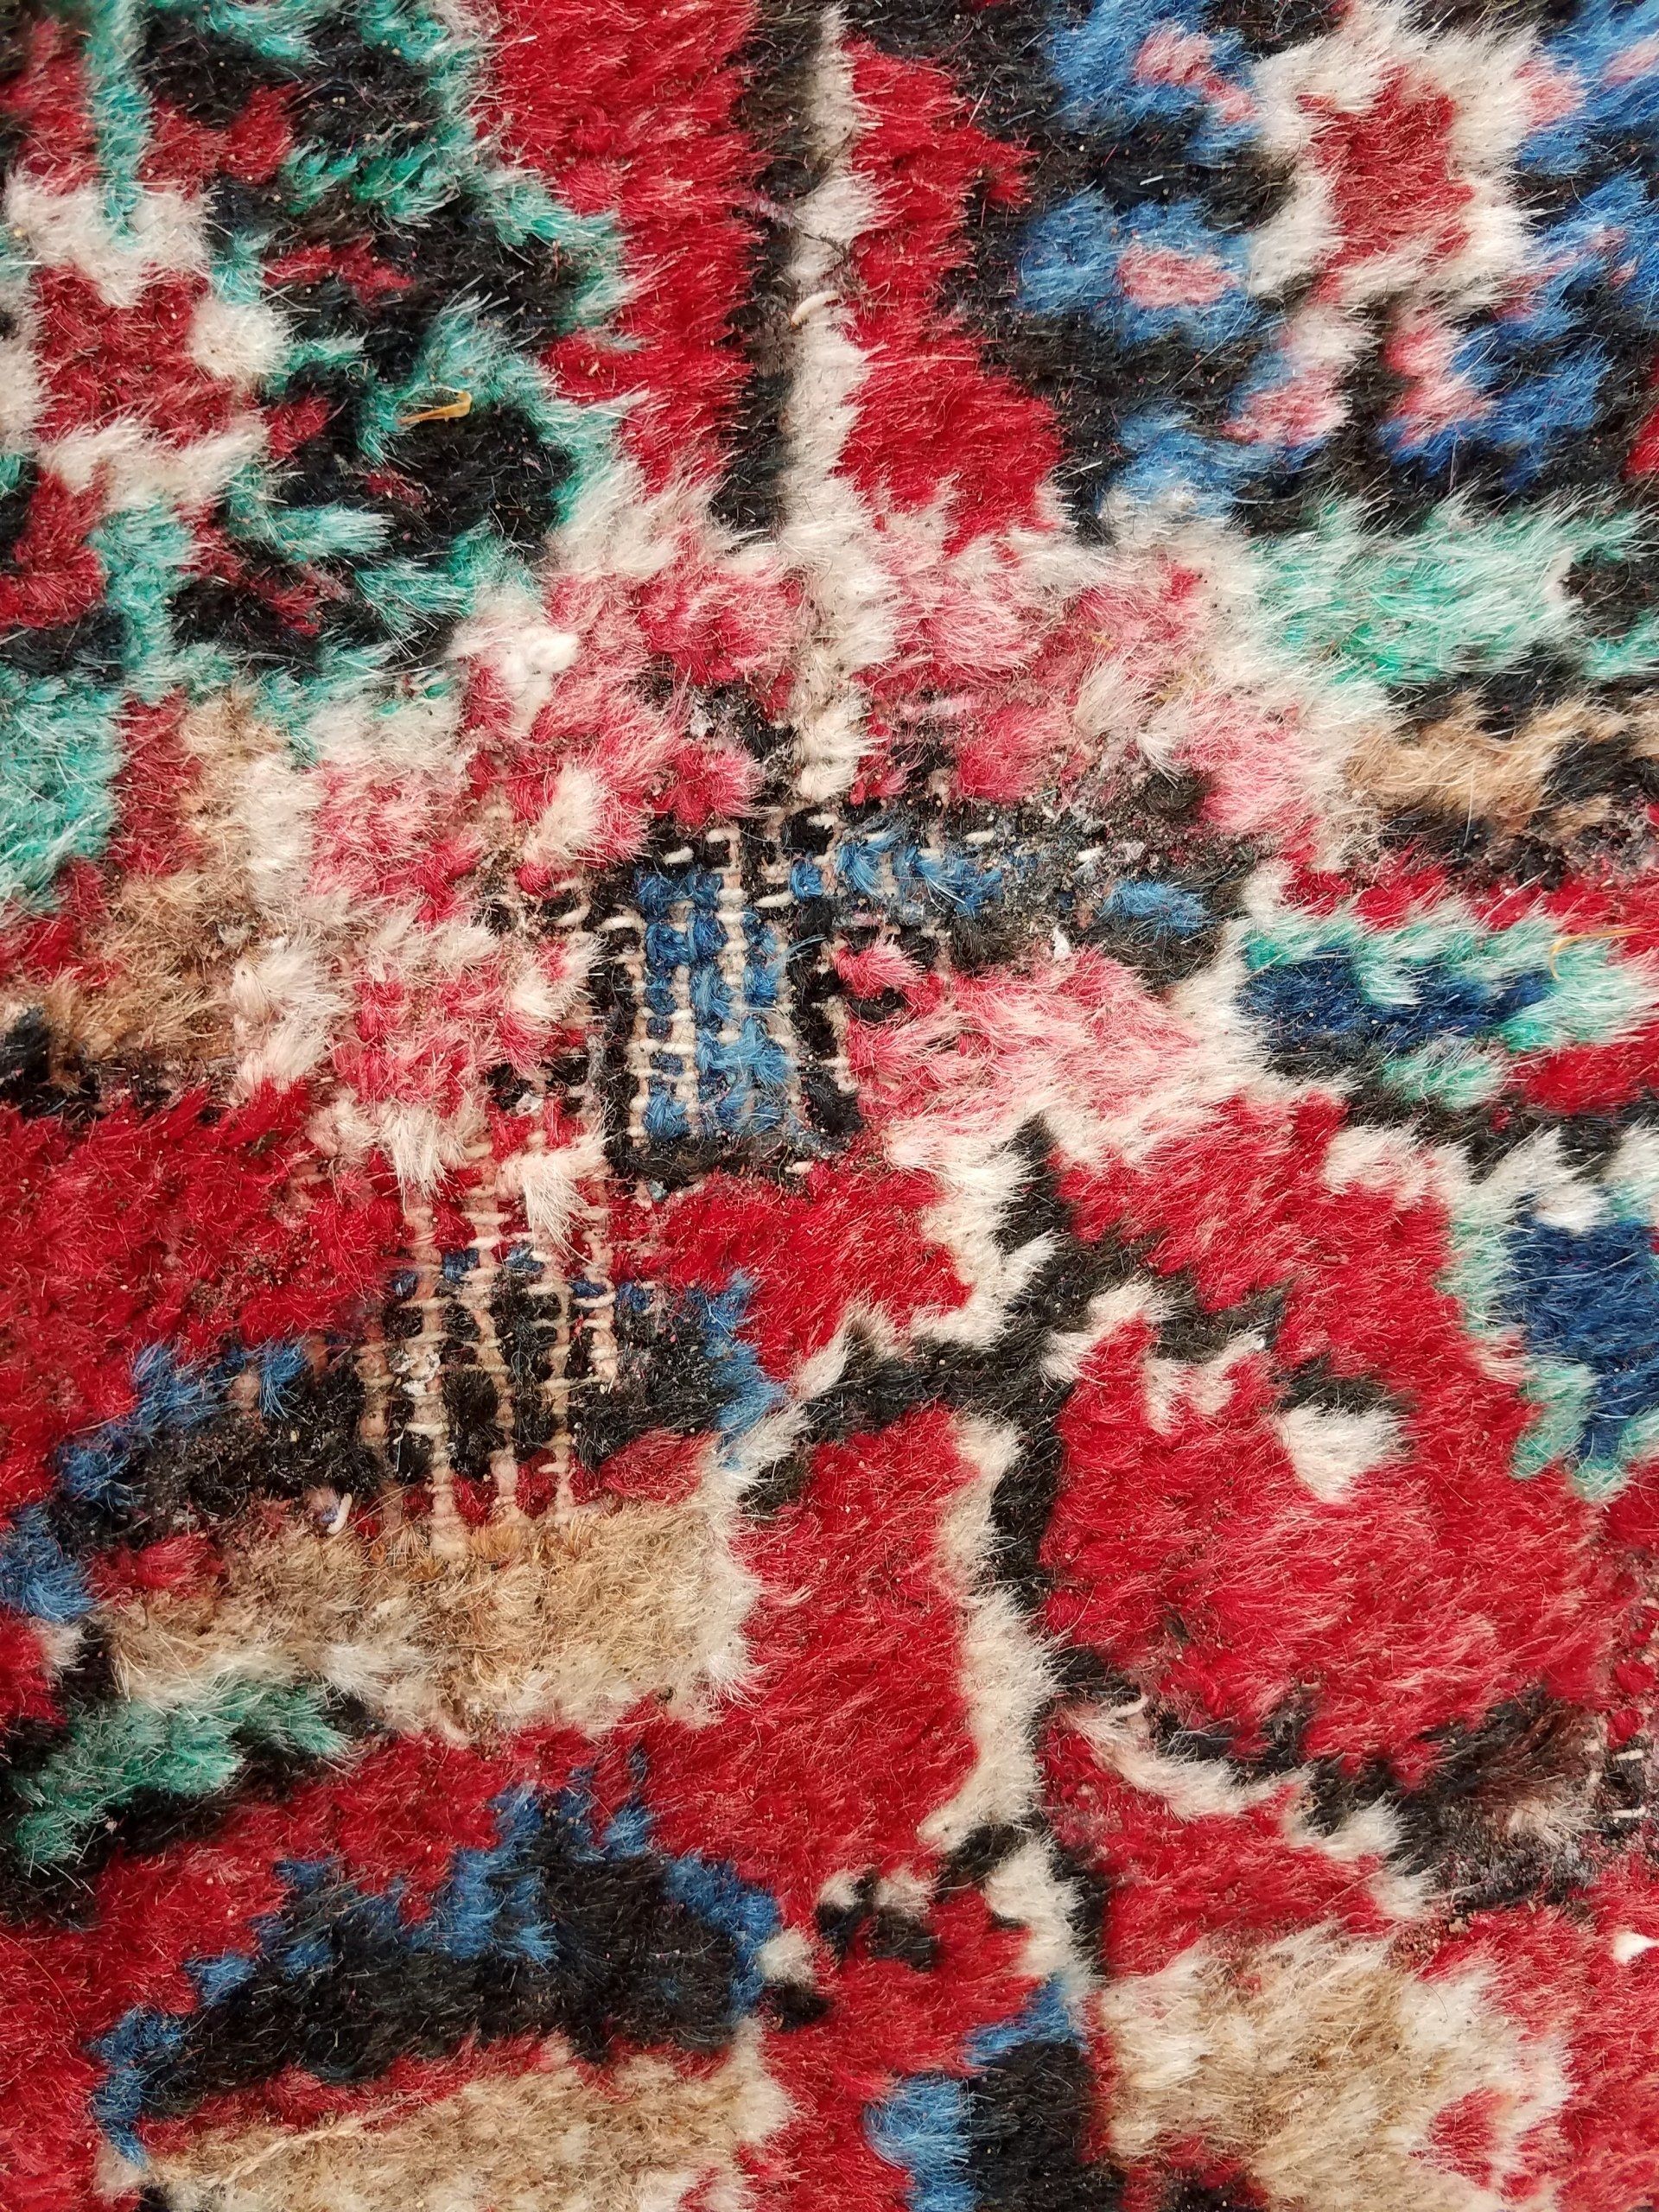 A close up of a colorful rug with a floral pattern